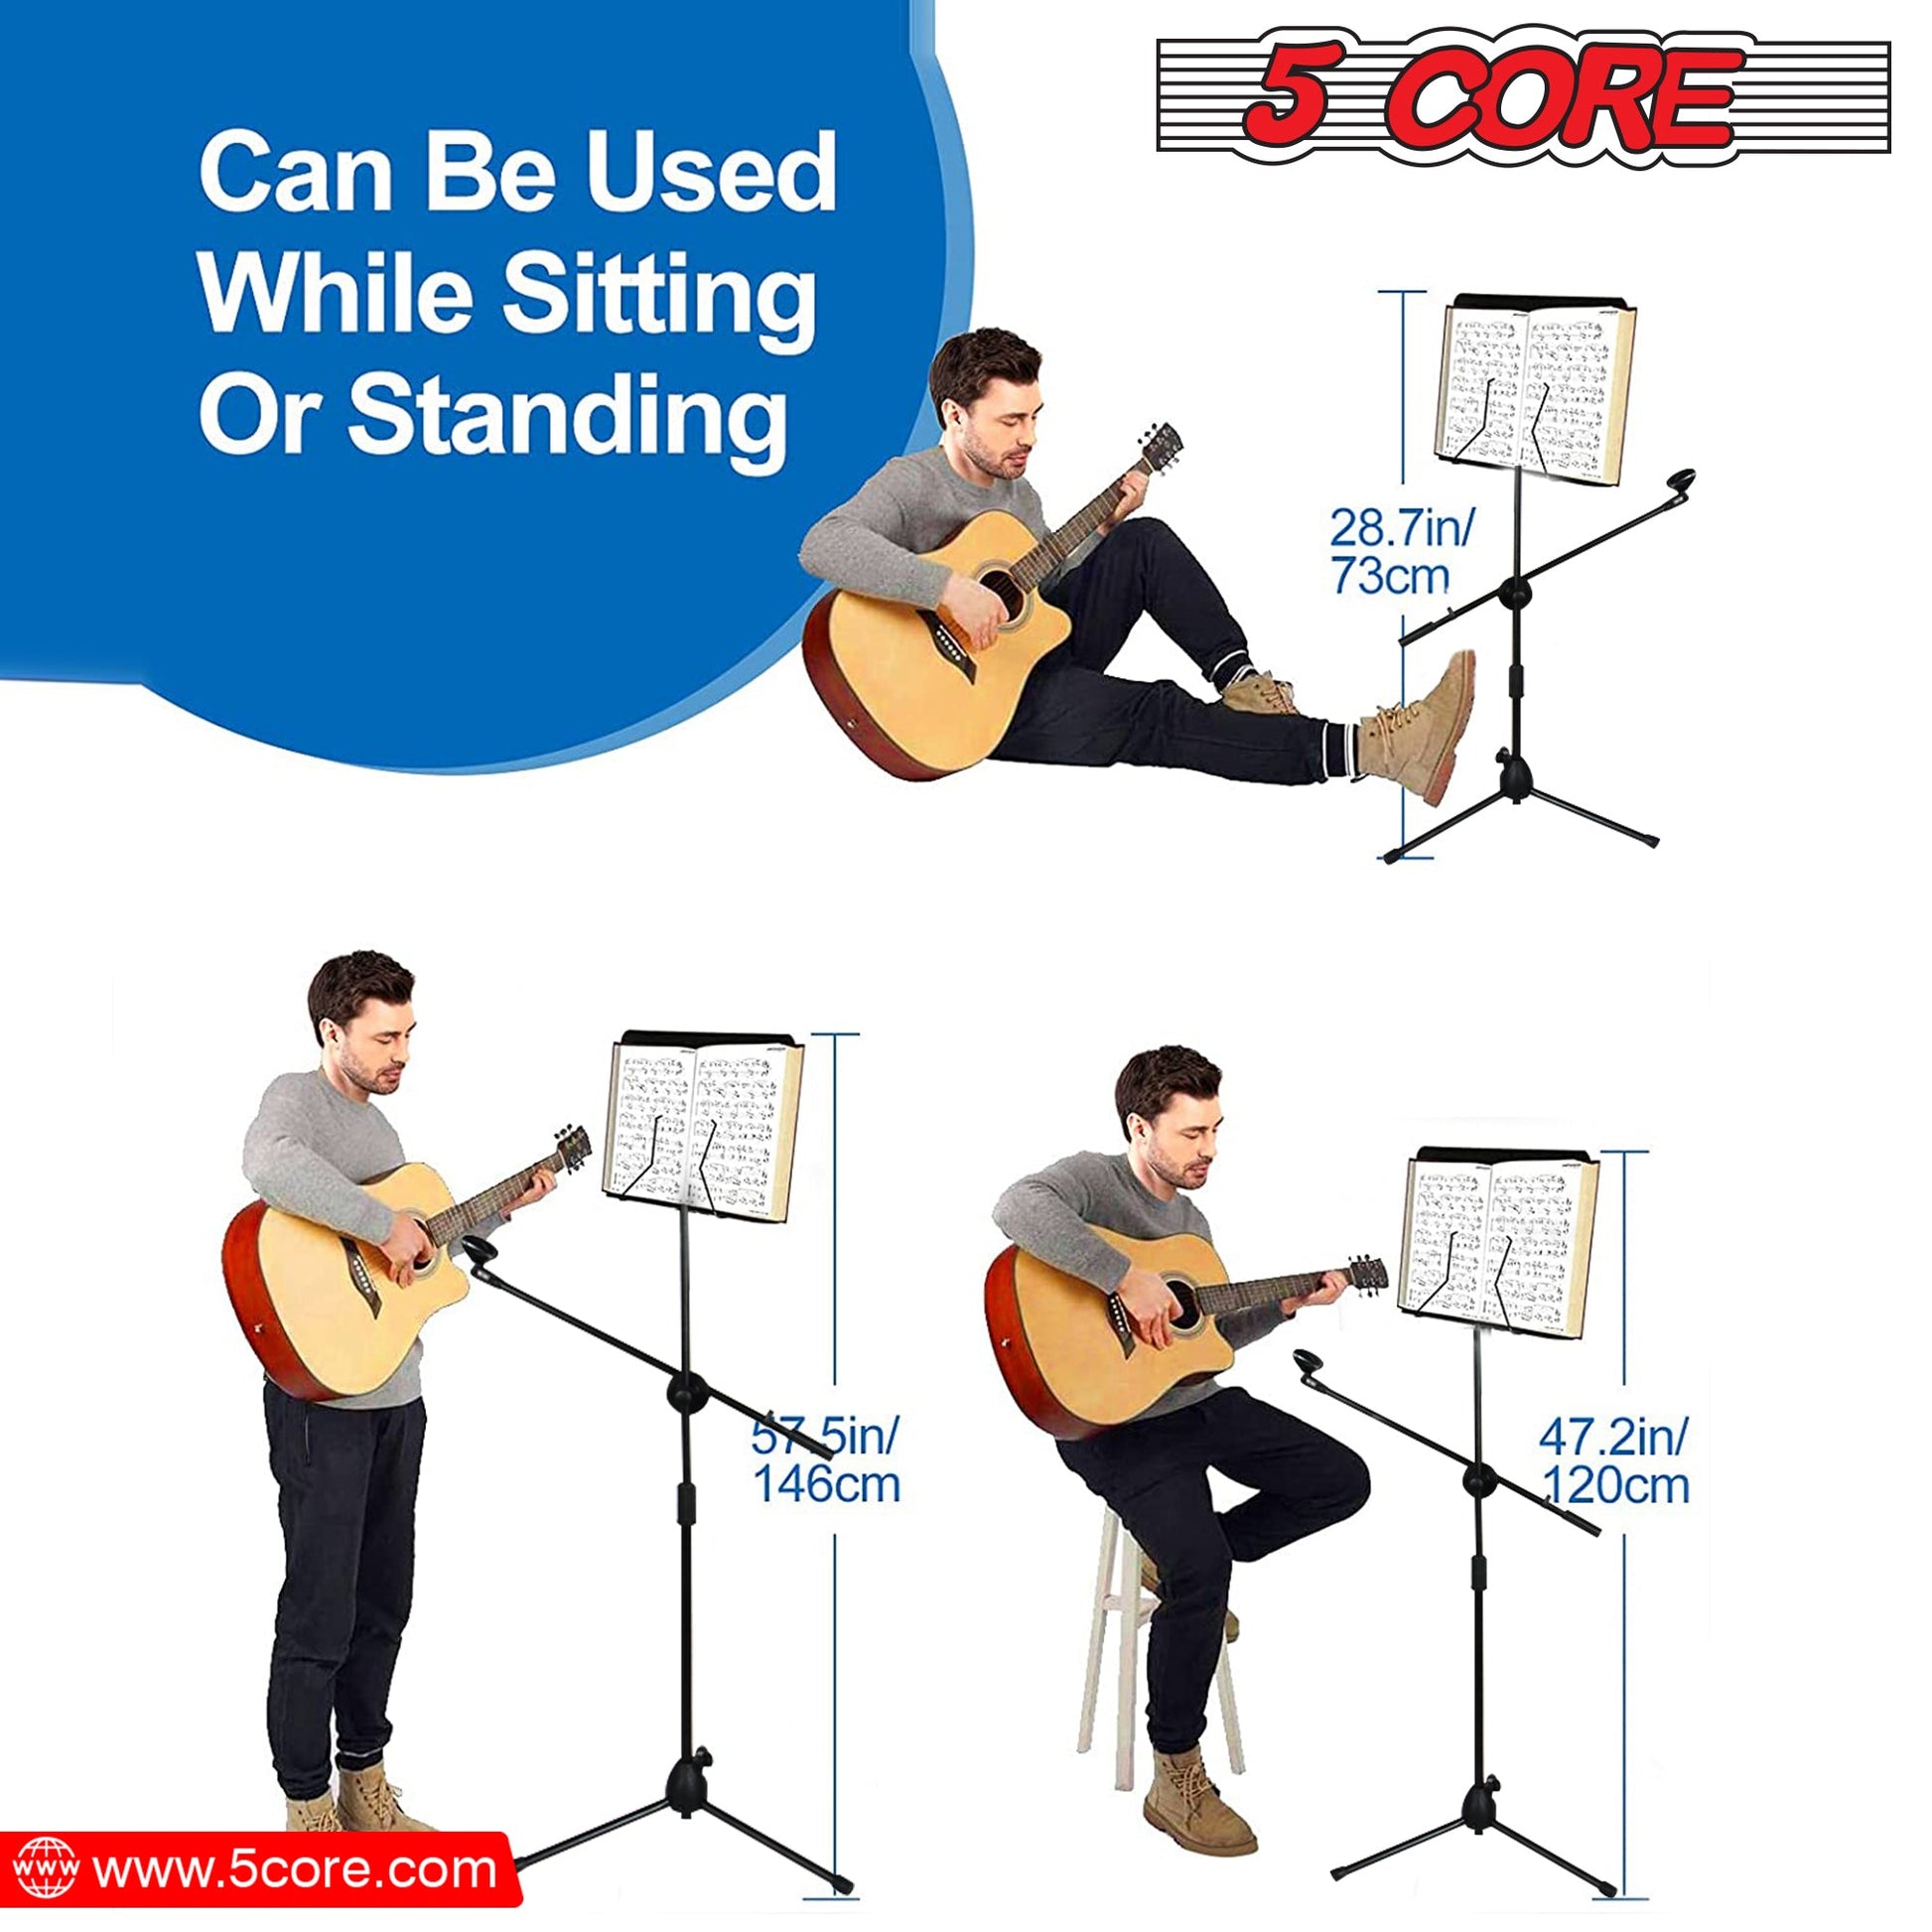 Ultimate Performance Combo: 5 Core Sheet Music Stand with Mic Stand Holder + Premium Vocal Dynamic Mic for Music and Karaoke Delights MUS MH+ND58BLK-7